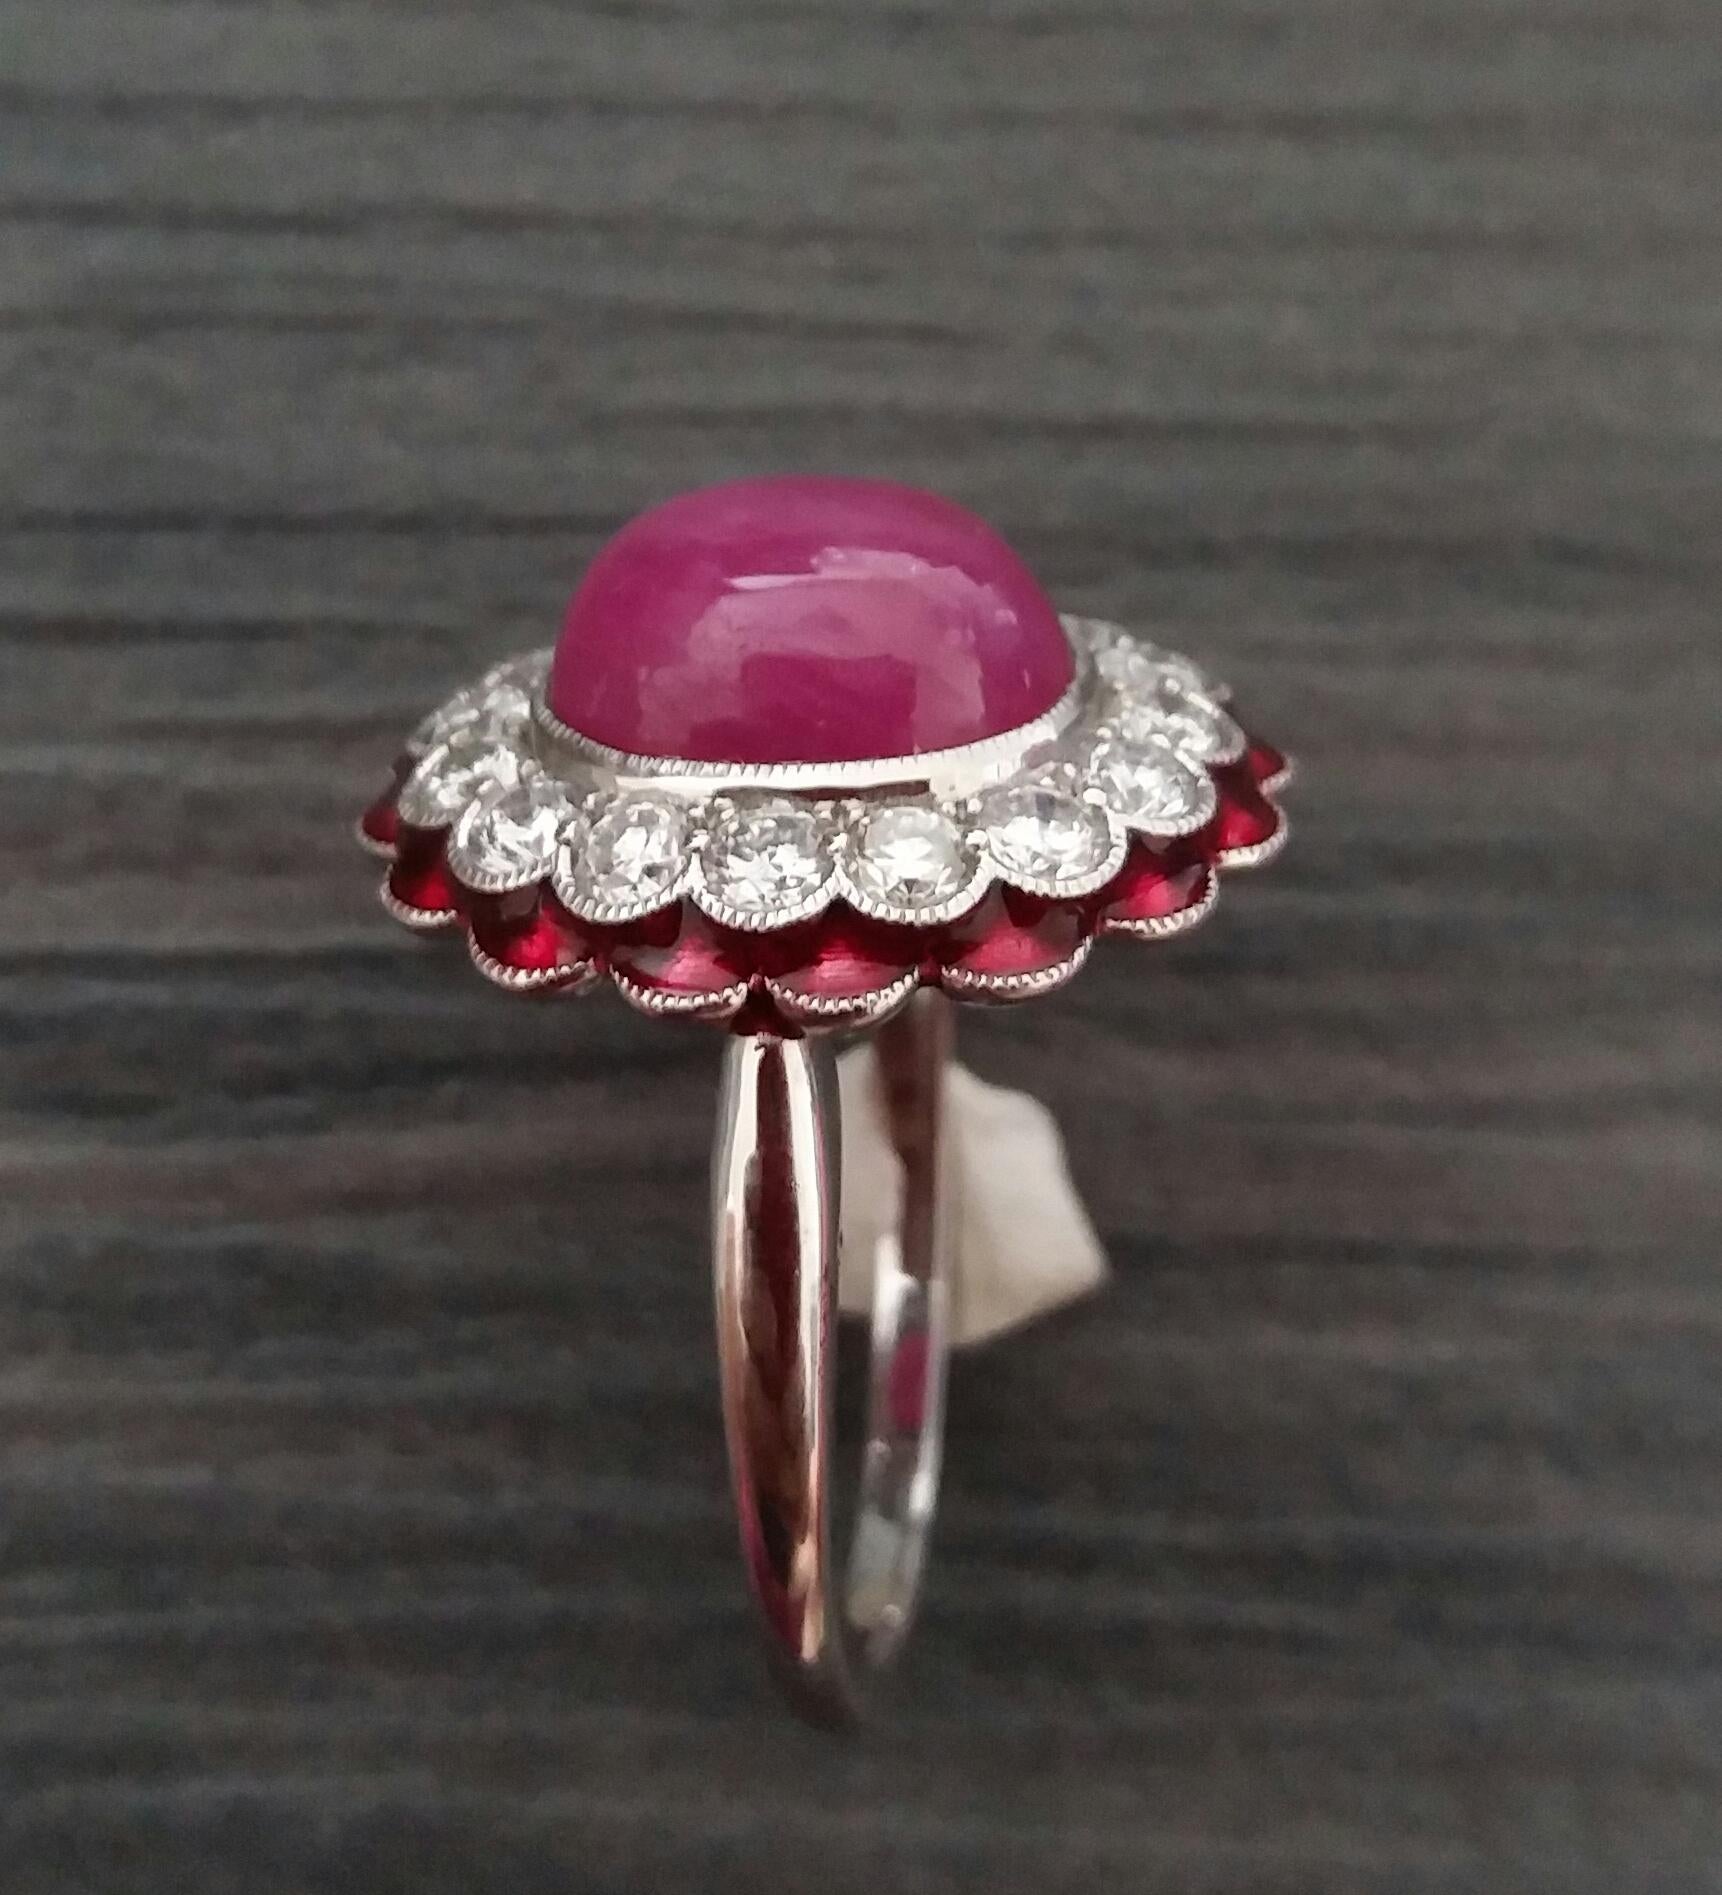 10 Carat Oval Ruby Cab 1 Carat Diamonds Red Enamel 14K White Gold Cocktail Ring For Sale 5